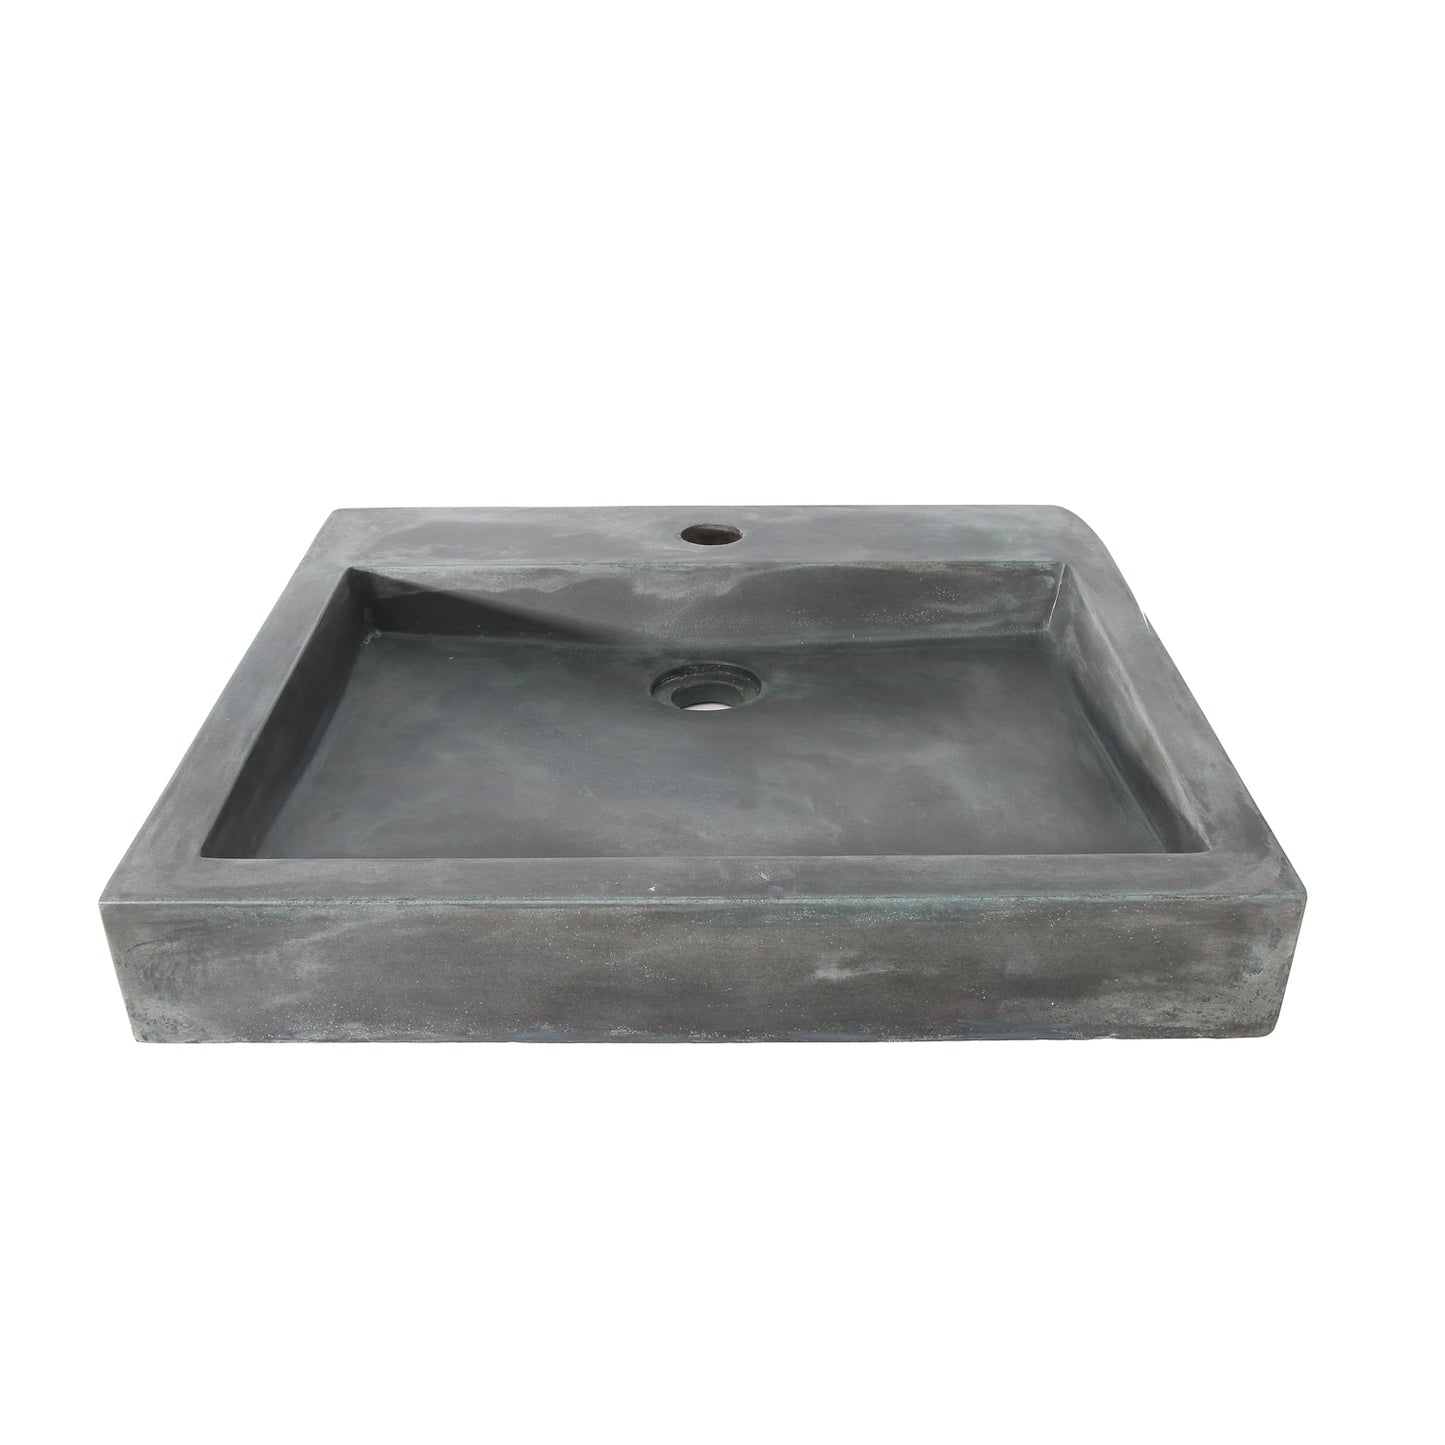 Ewan Rectangle Cement Vessel Basin Sink in Copper Green with 1 Faucet Hole